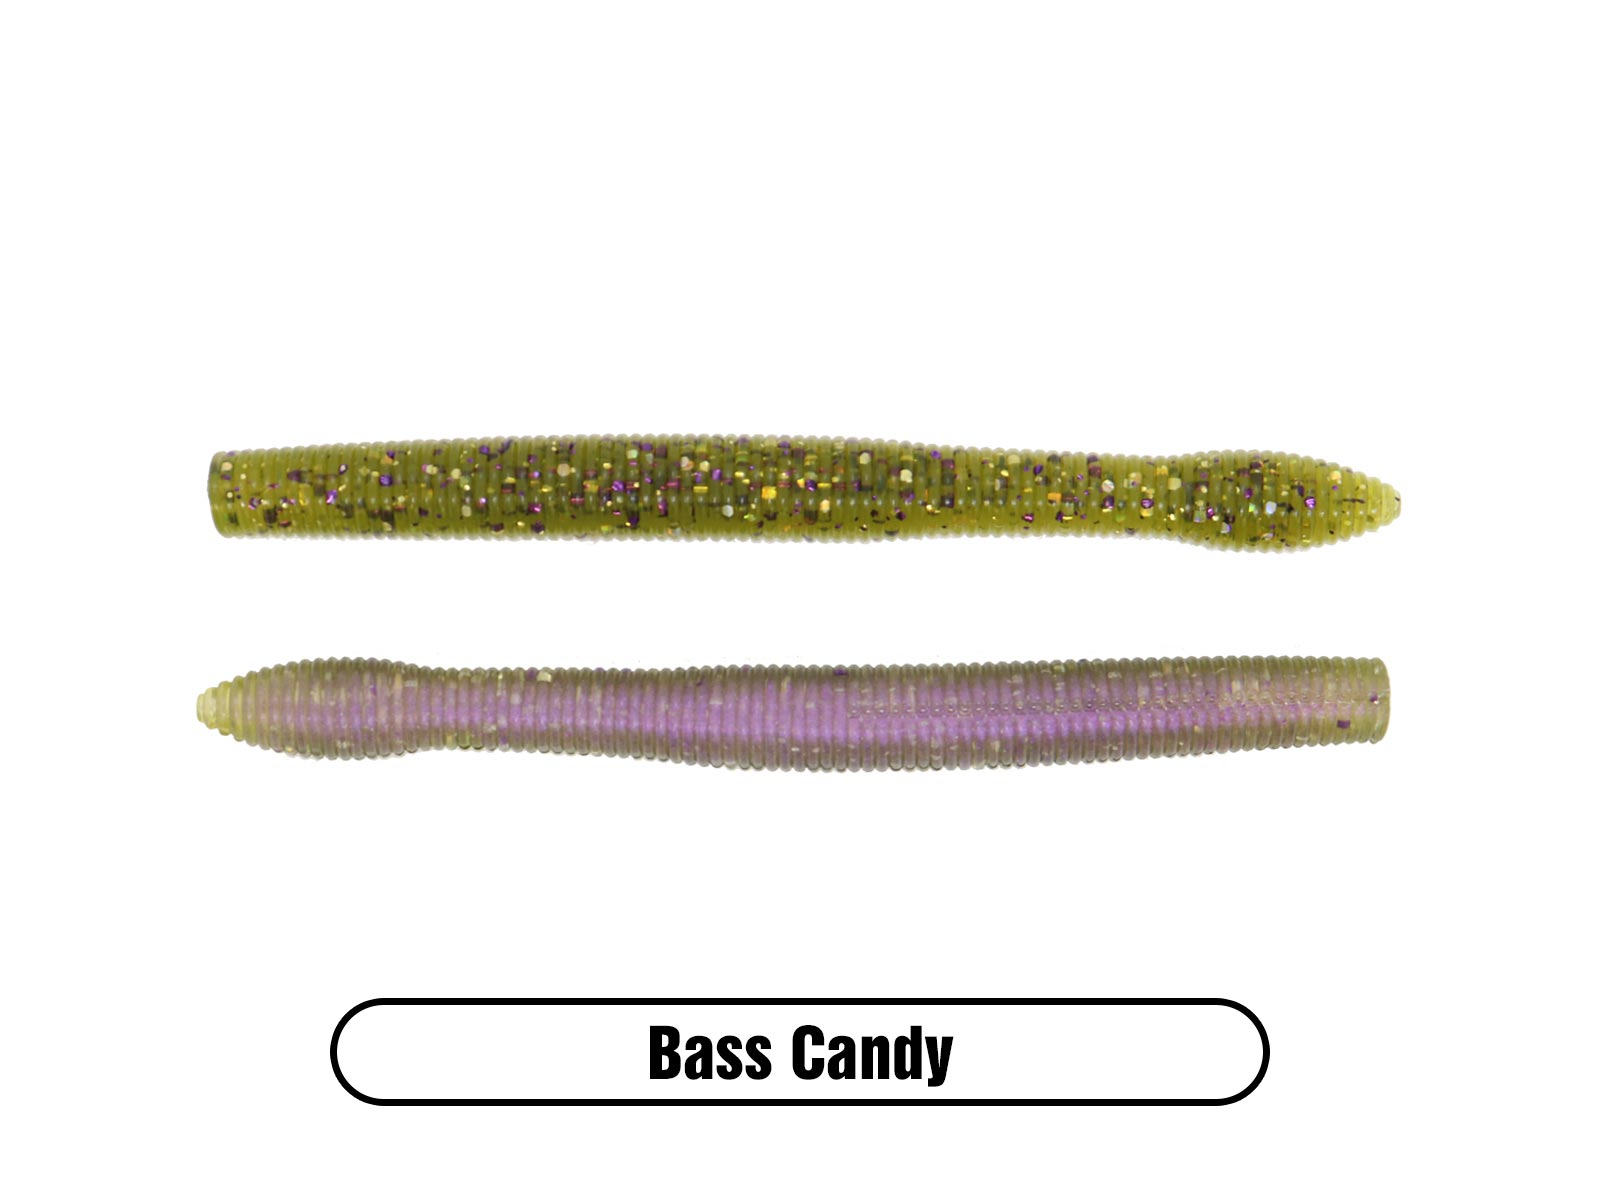 Soft Plastic Ned Rig and Neko Rig Bait for Largemouth Bass Fishing, Smallmouth Bass Fishing and Walleye Fishing Lure